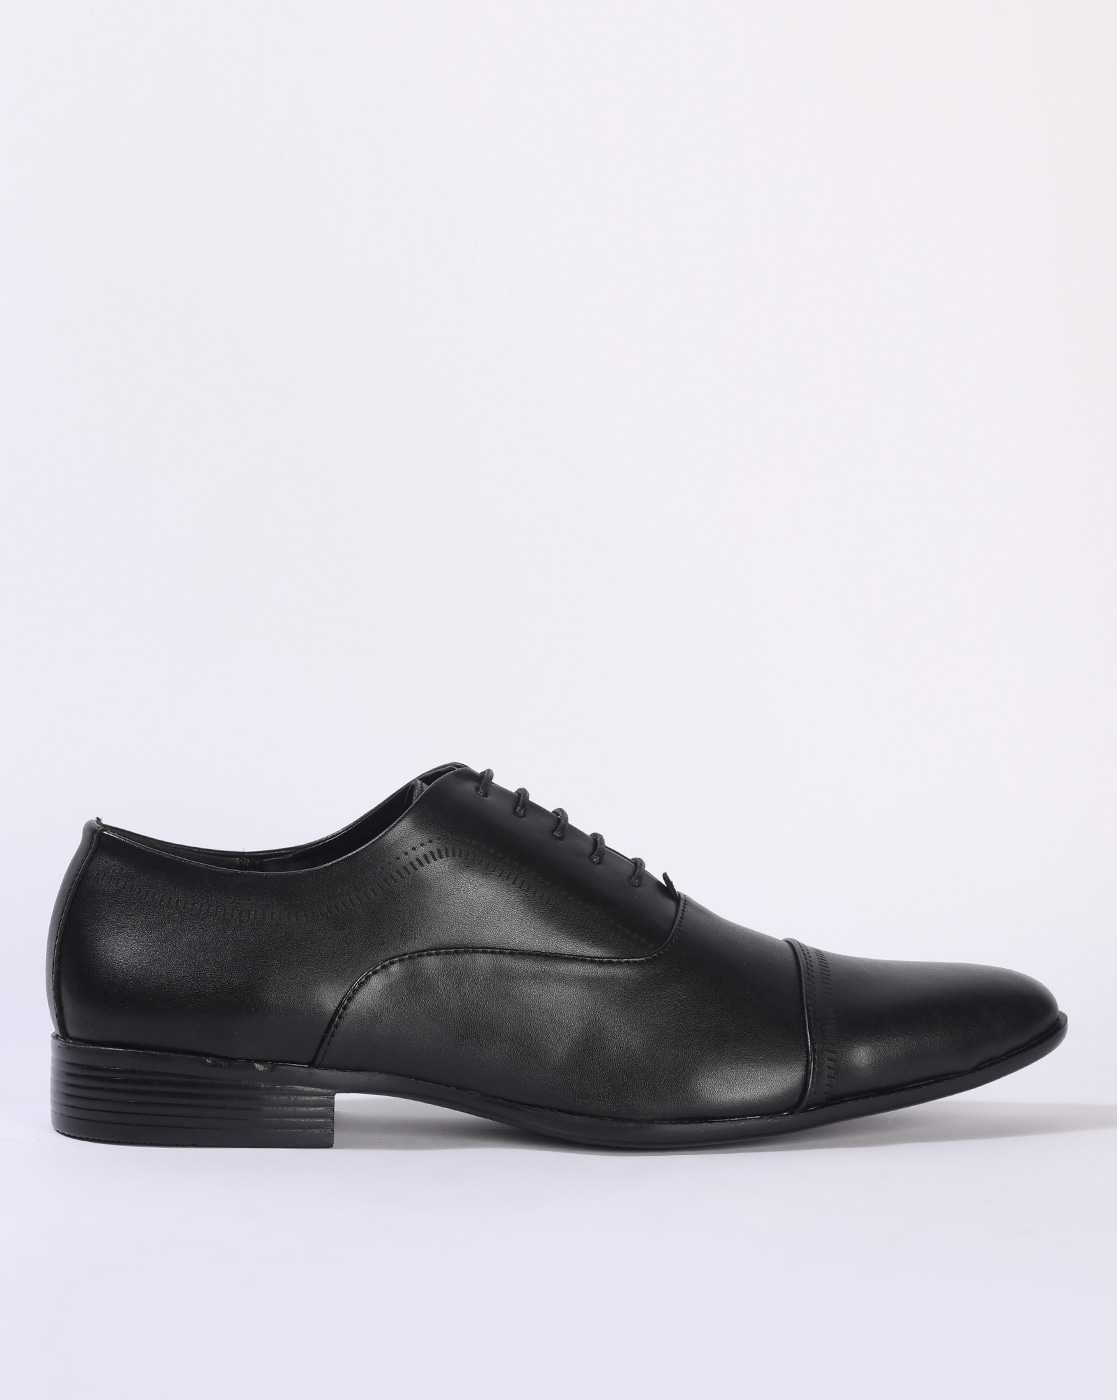 Buy Black Formal Shoes for Men by AJIO 